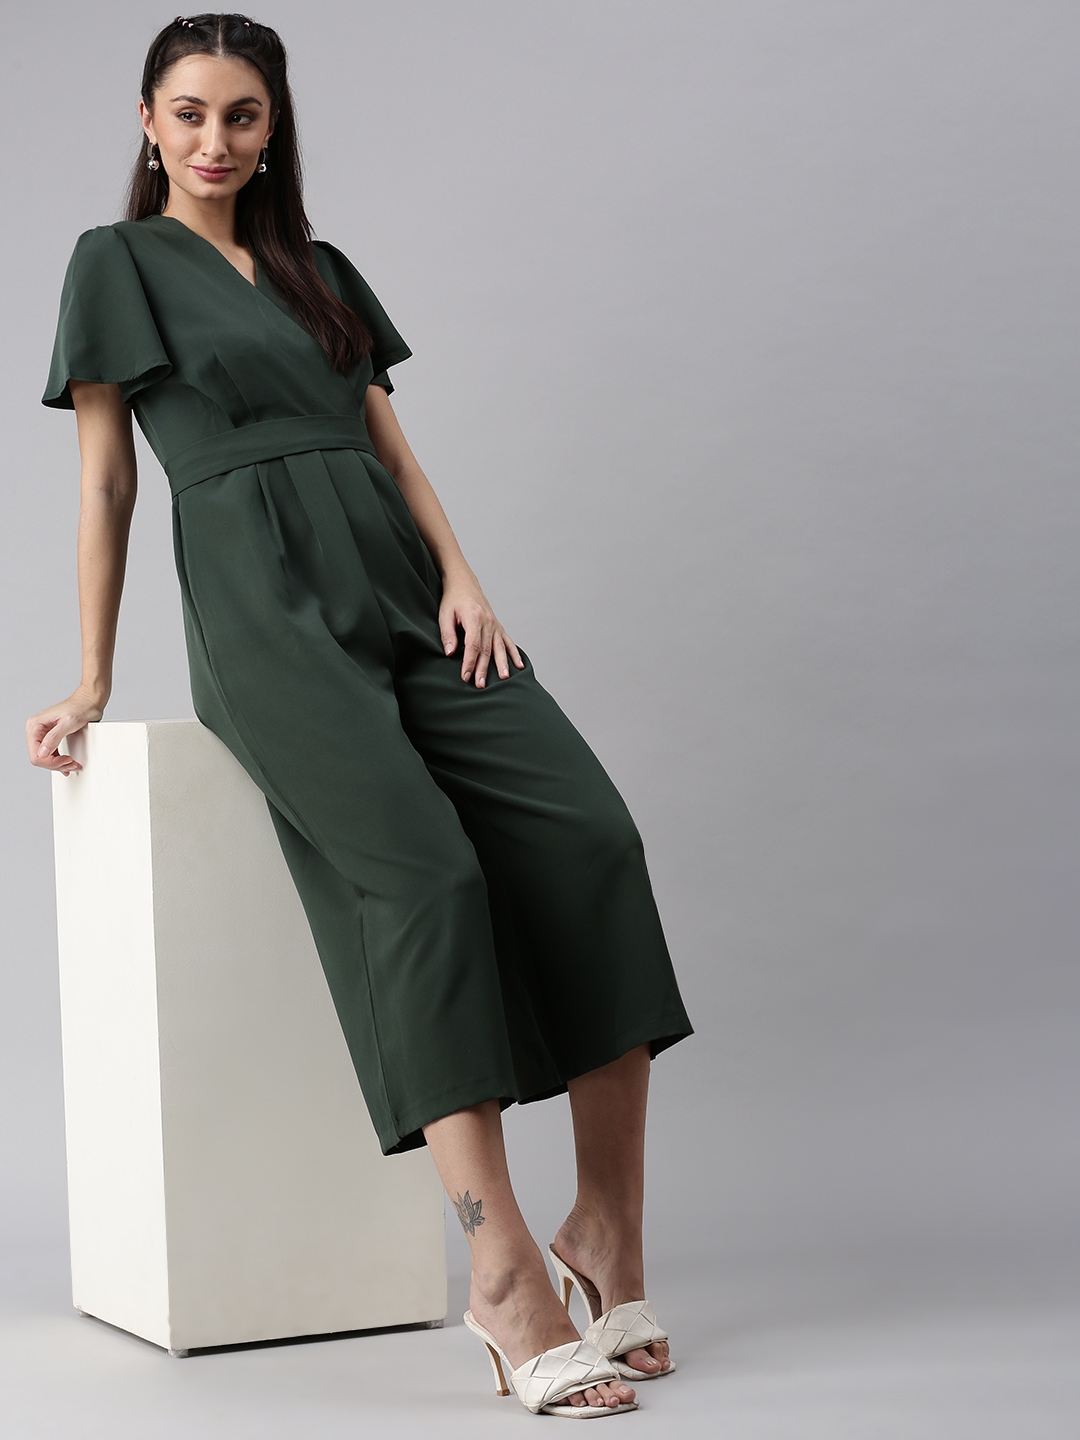 Women's Green Polyester Solid Jumpsuits